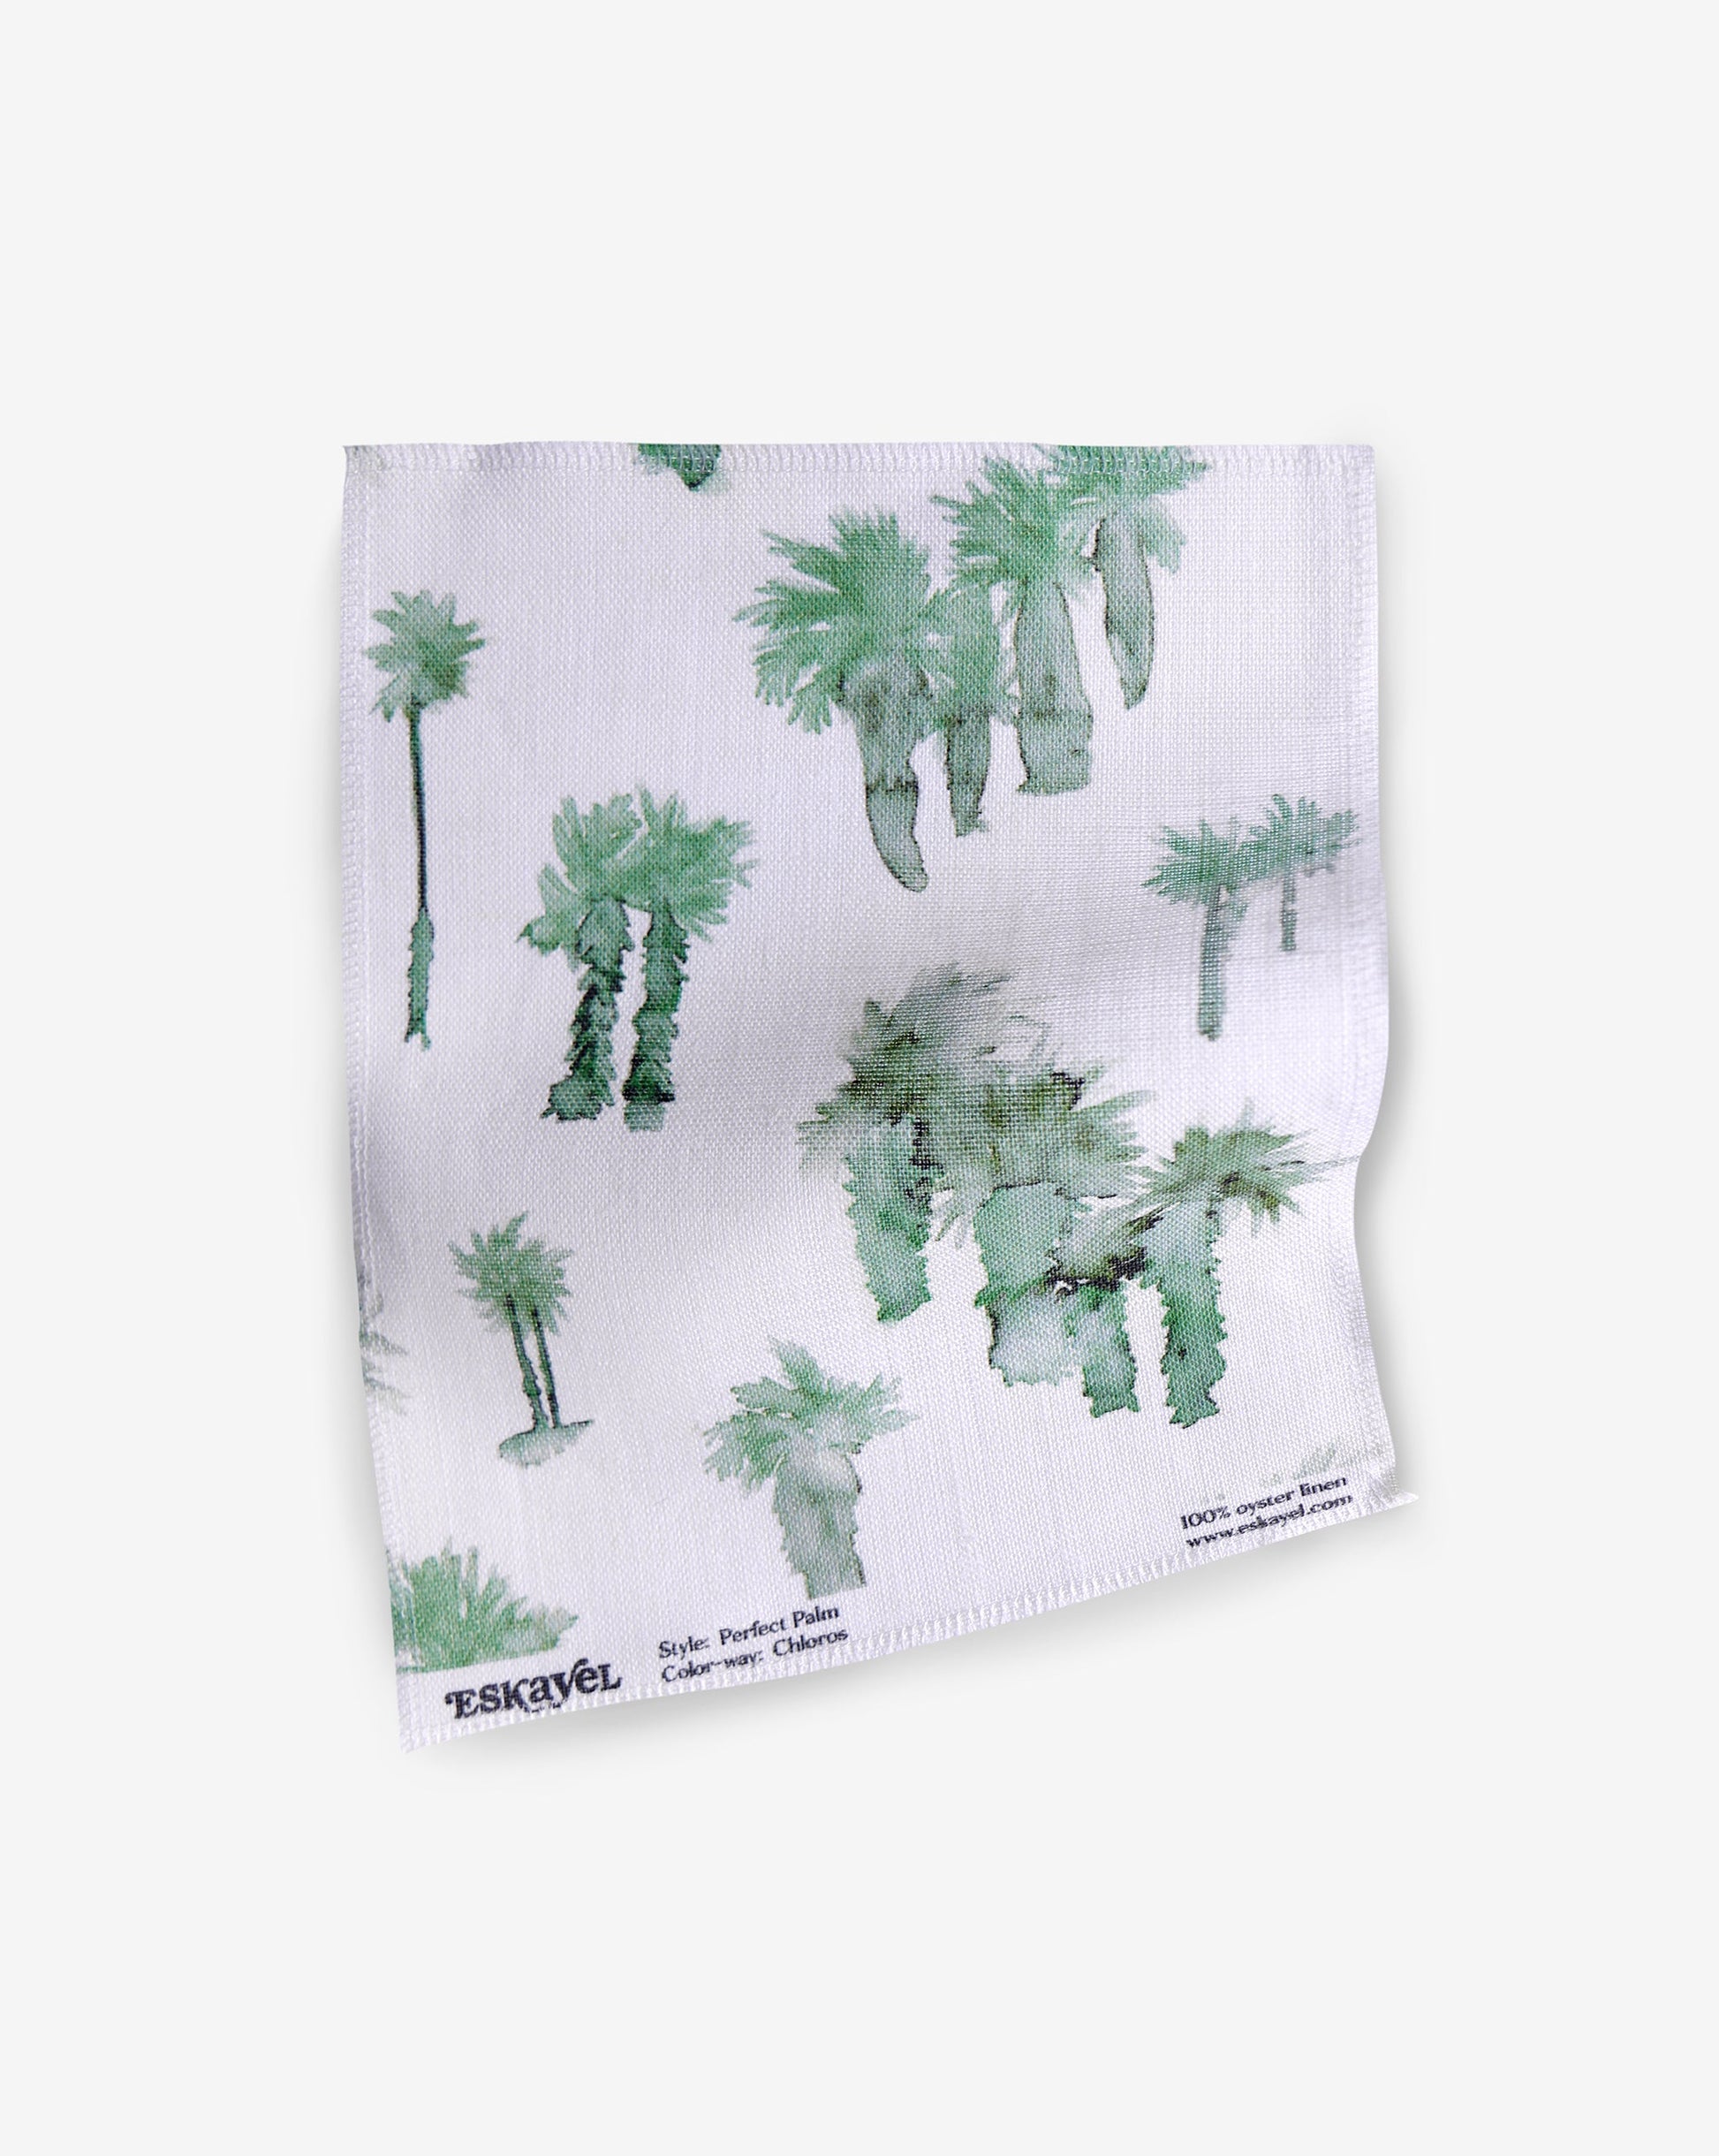 A luxurious Perfect Palm Fabric Chloros with palm trees in a watercolor style